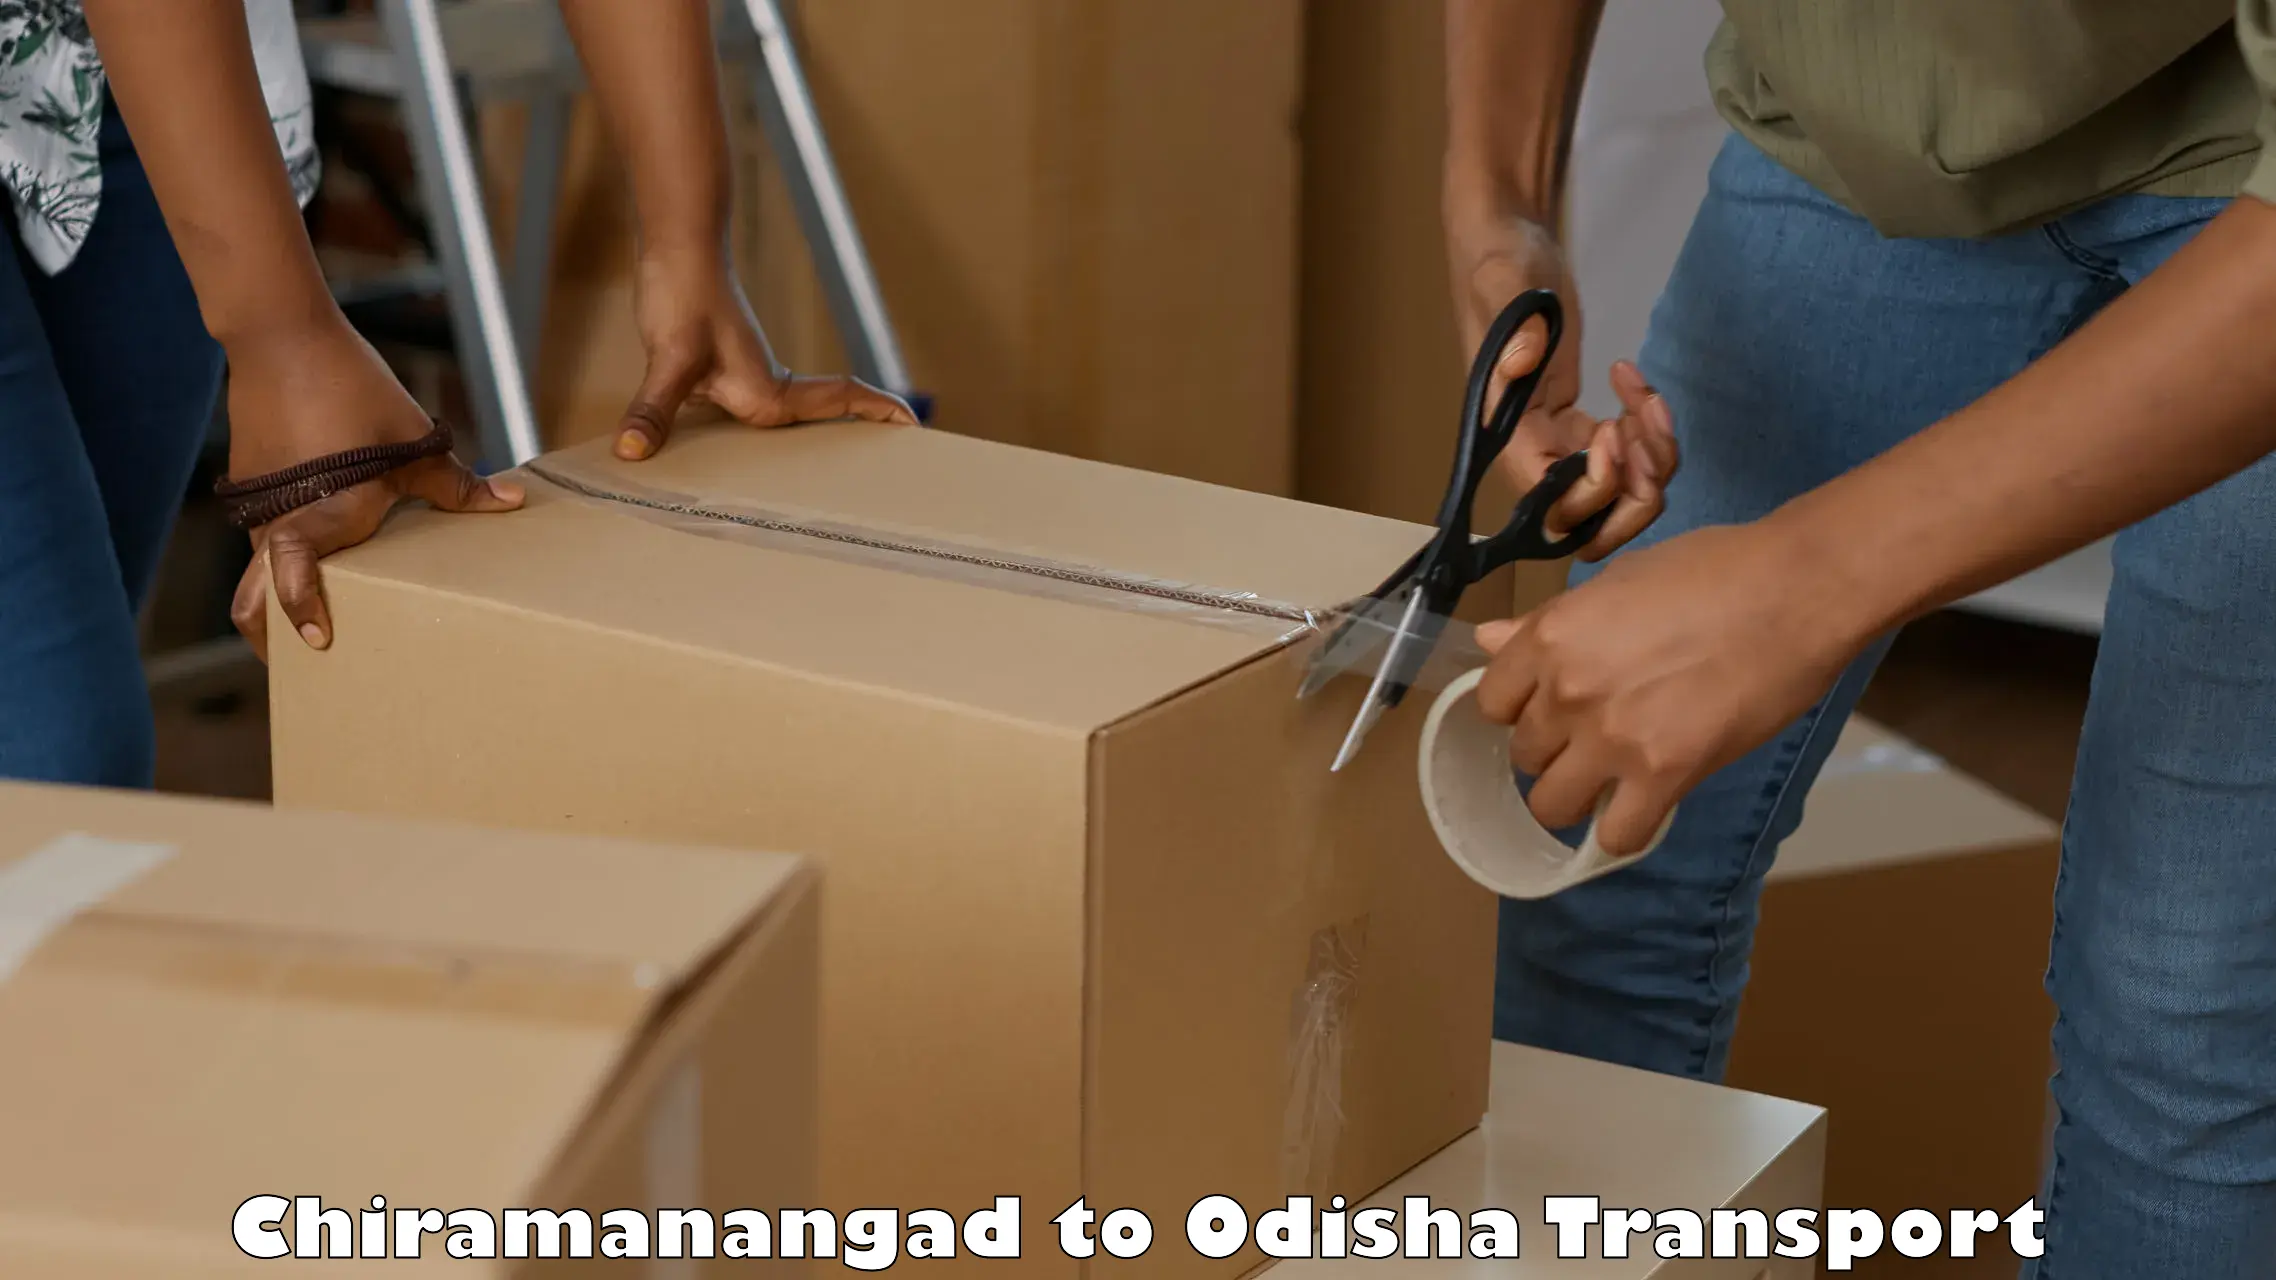 Package delivery services Chiramanangad to Daspalla